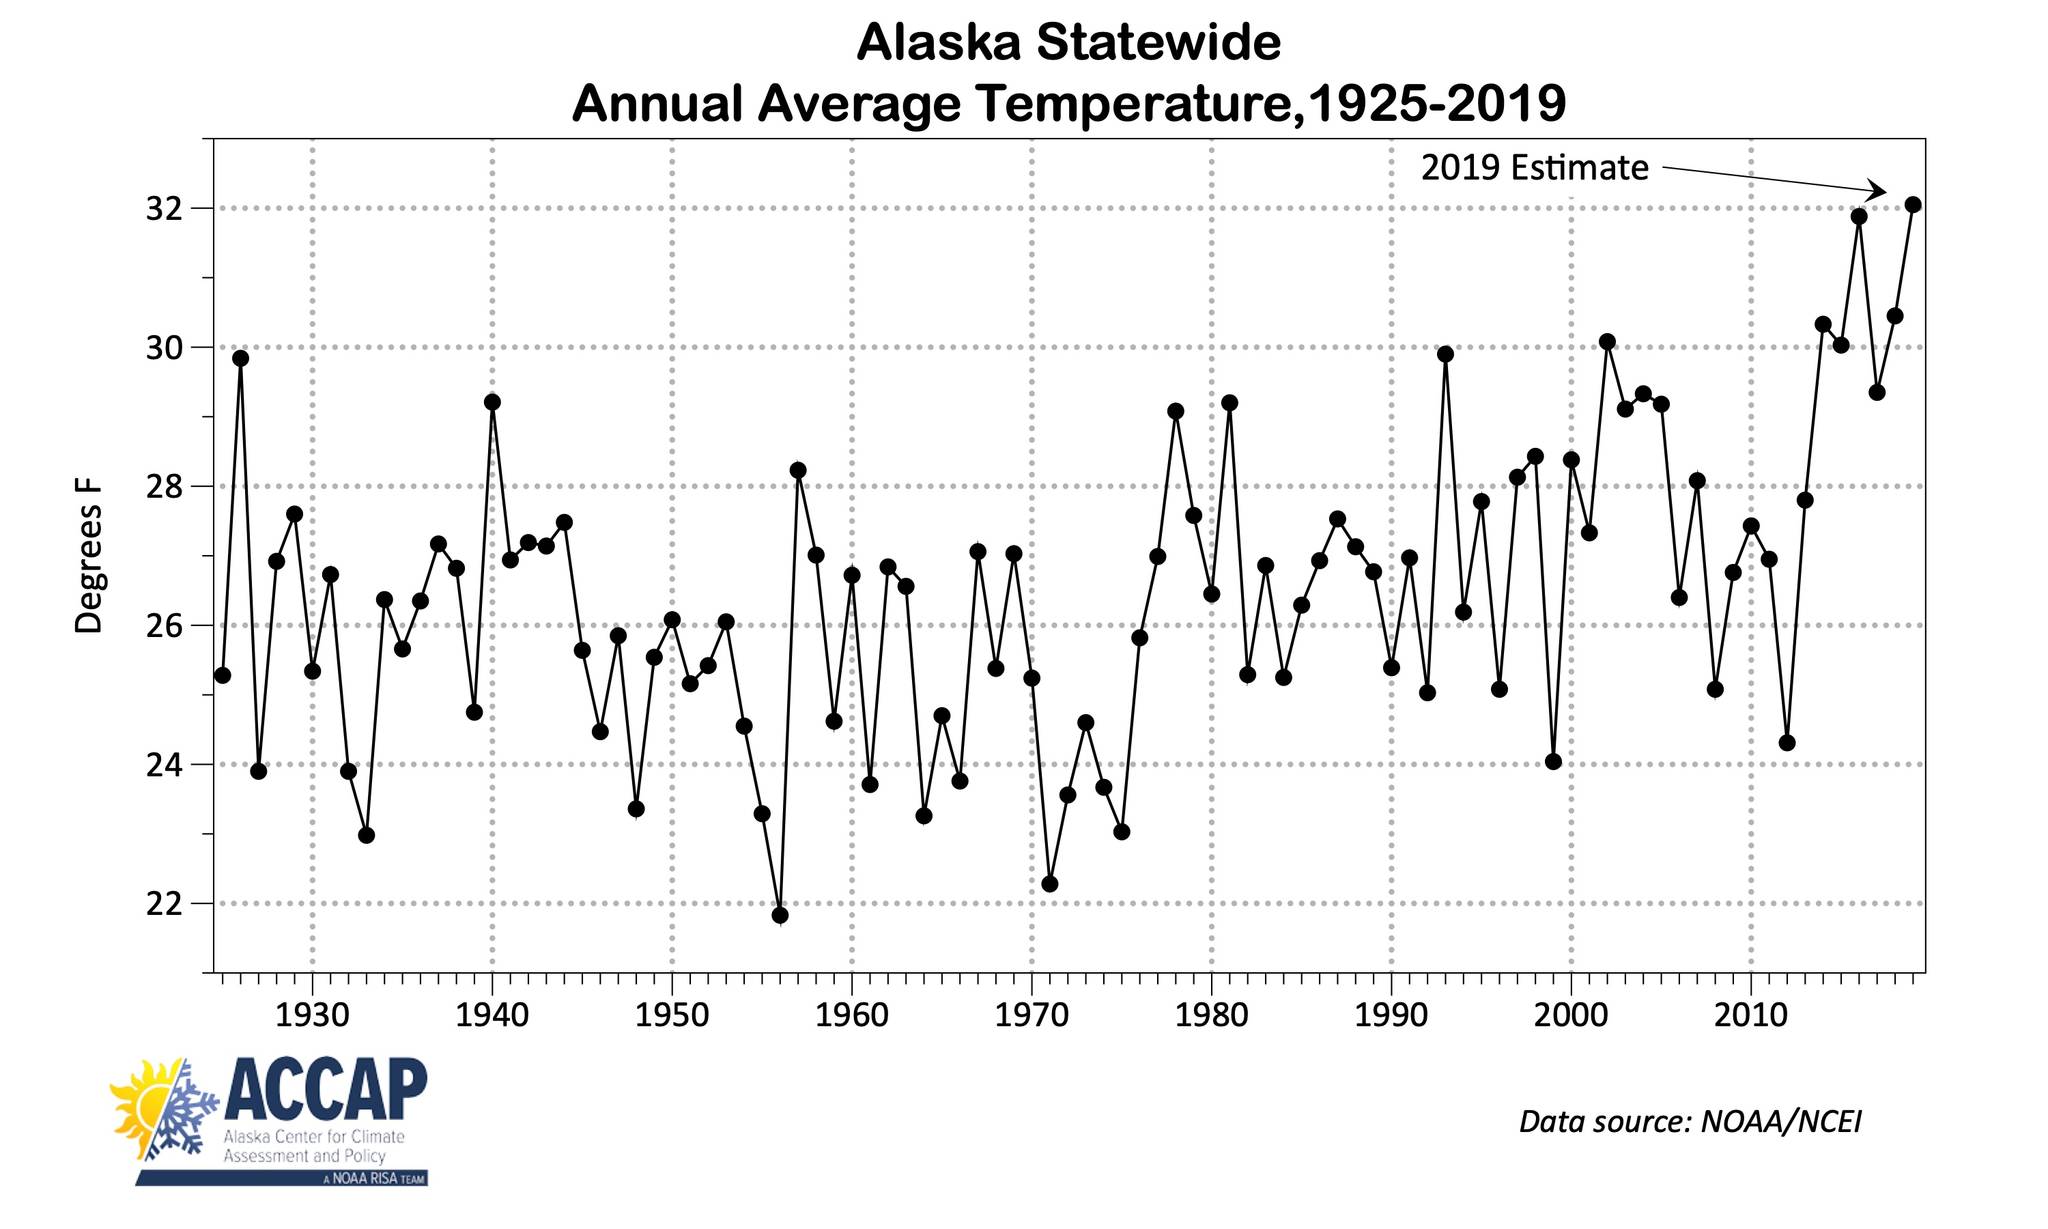 2019 will be Alaska’s warmest year on record, and it looks like that’s going to continue